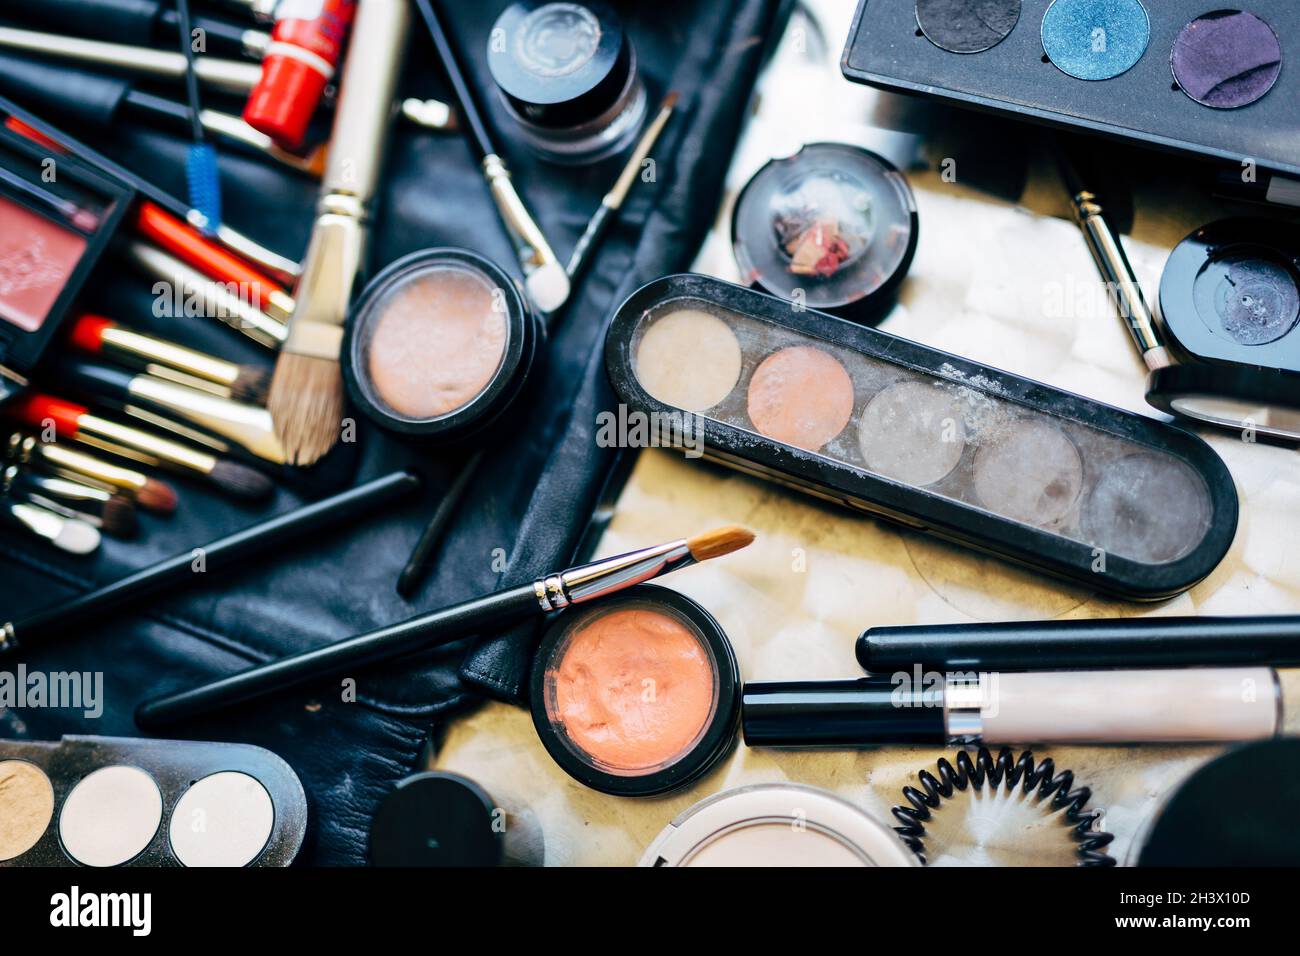 Professional set for applying makeup with brushes, eyeshadow palette and mascara scattered on the table. Makeup artist set. Stock Photo